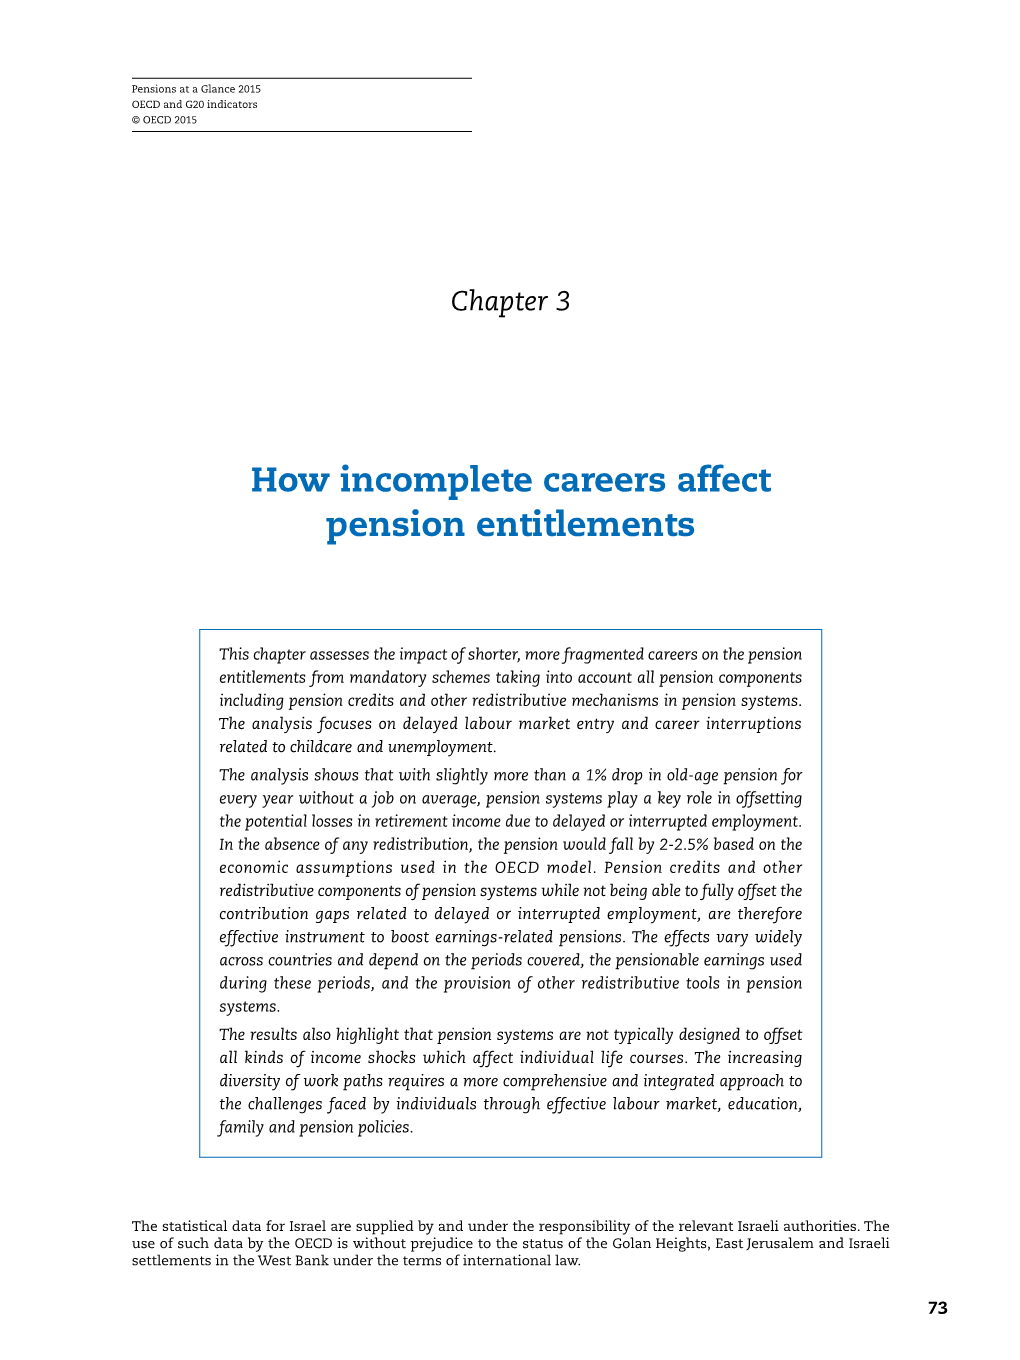 How Incomplete Careers Affect Pension Entitlements